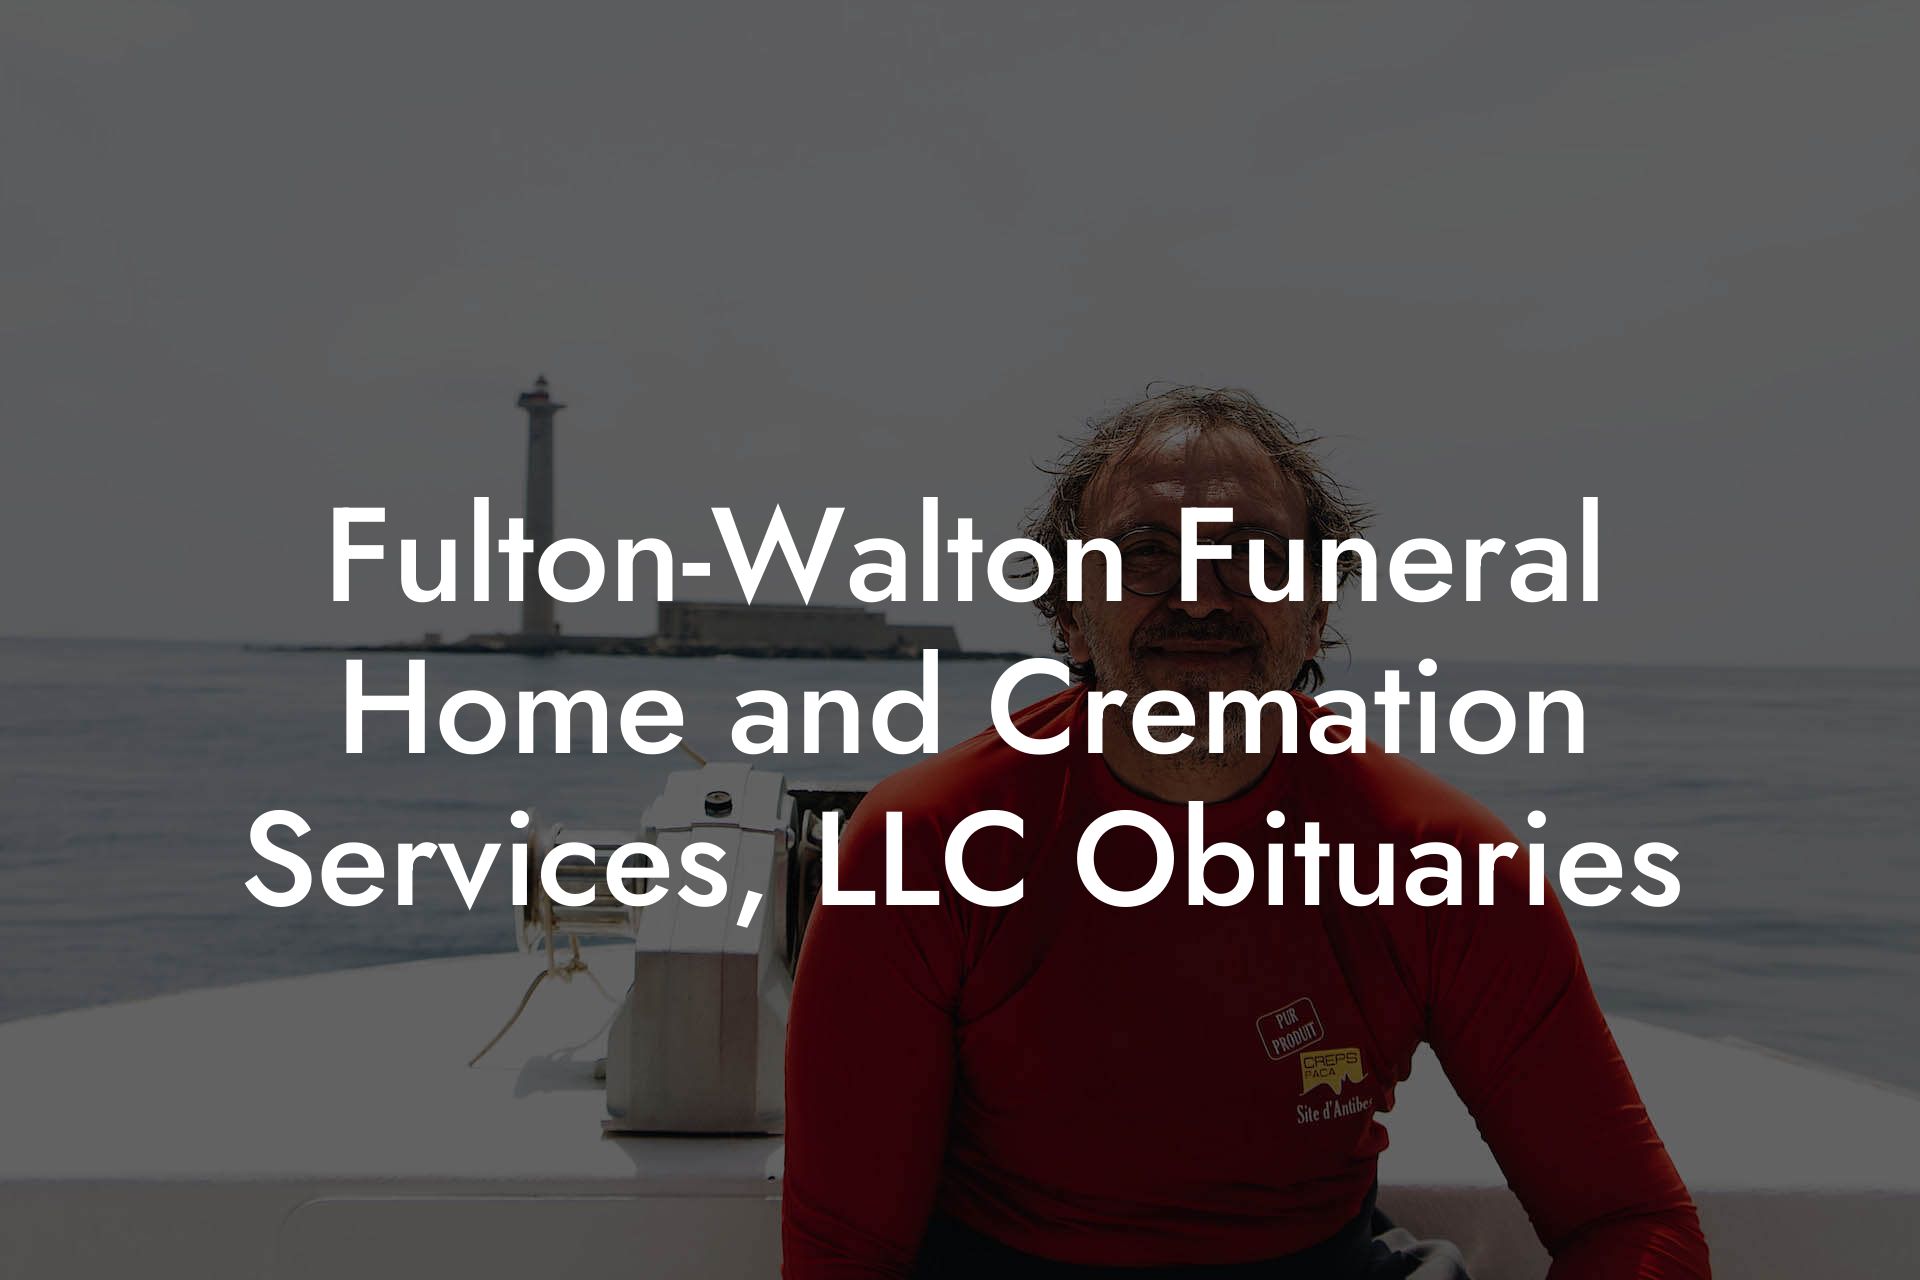 Fulton-Walton Funeral Home and Cremation Services, LLC Obituaries